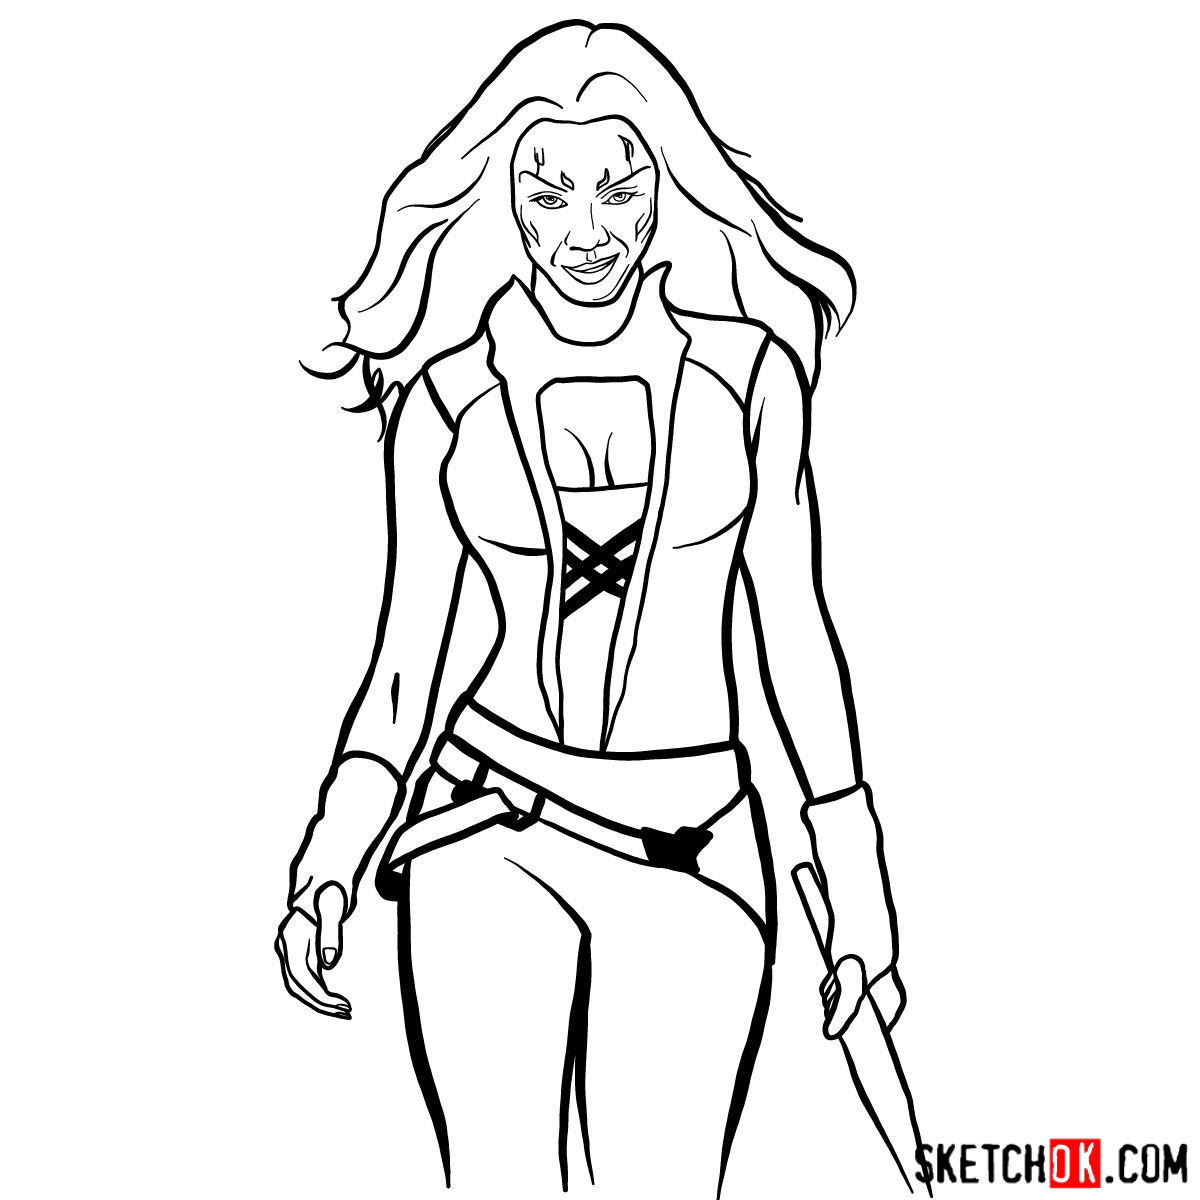 How to draw Gamora from Guardians of the Galaxy - Sketchok easy drawing